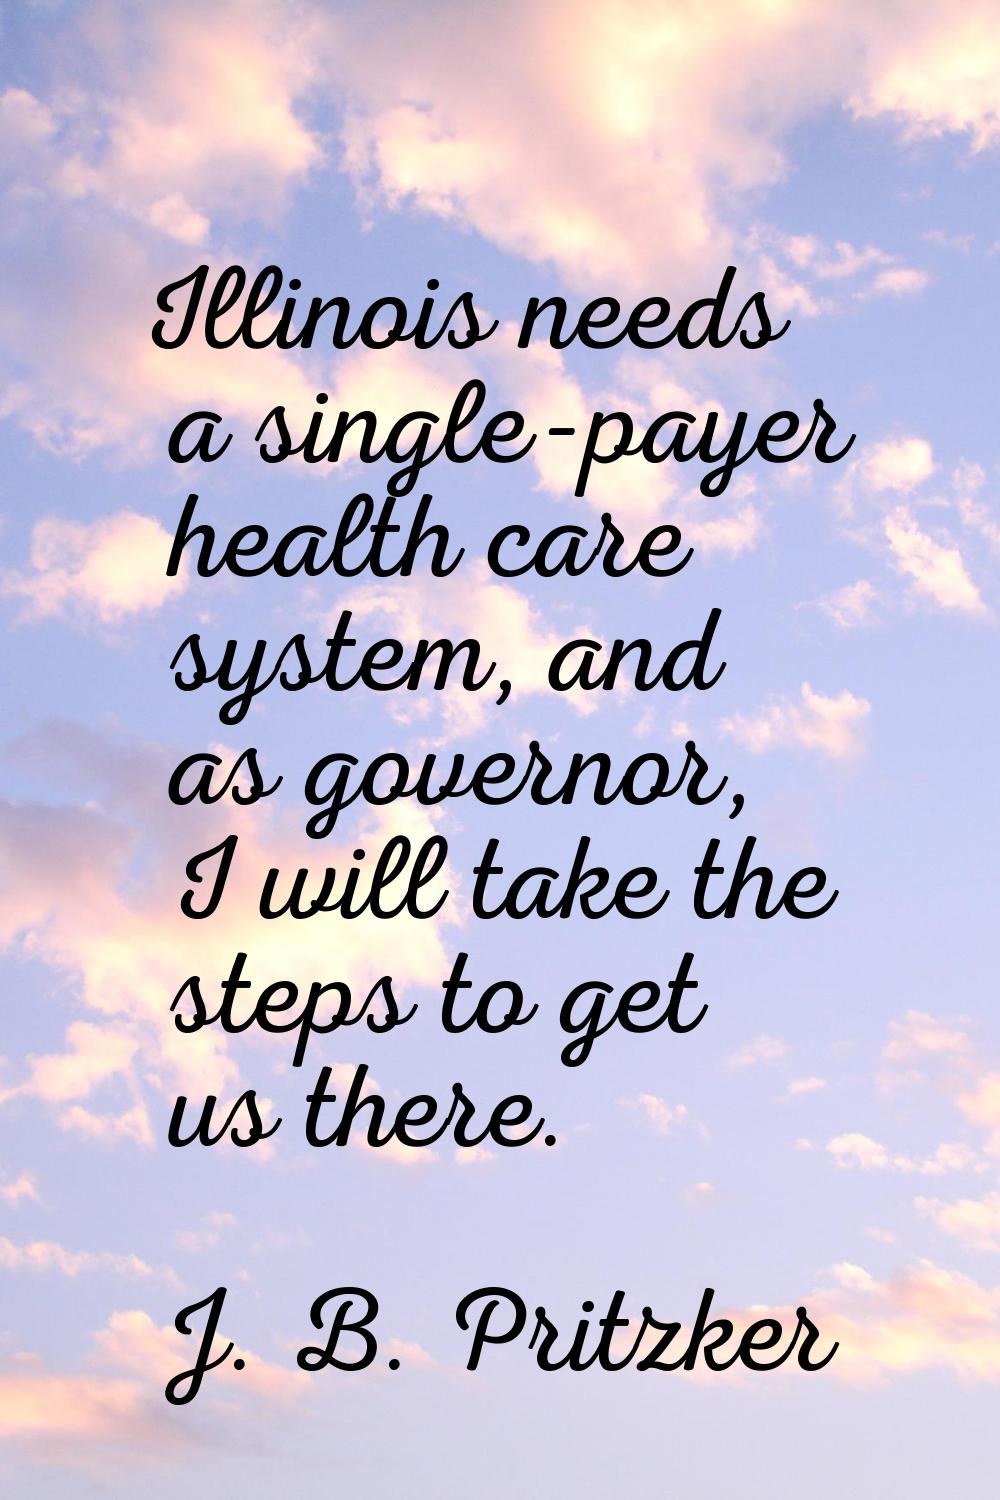 Illinois needs a single-payer health care system, and as governor, I will take the steps to get us 